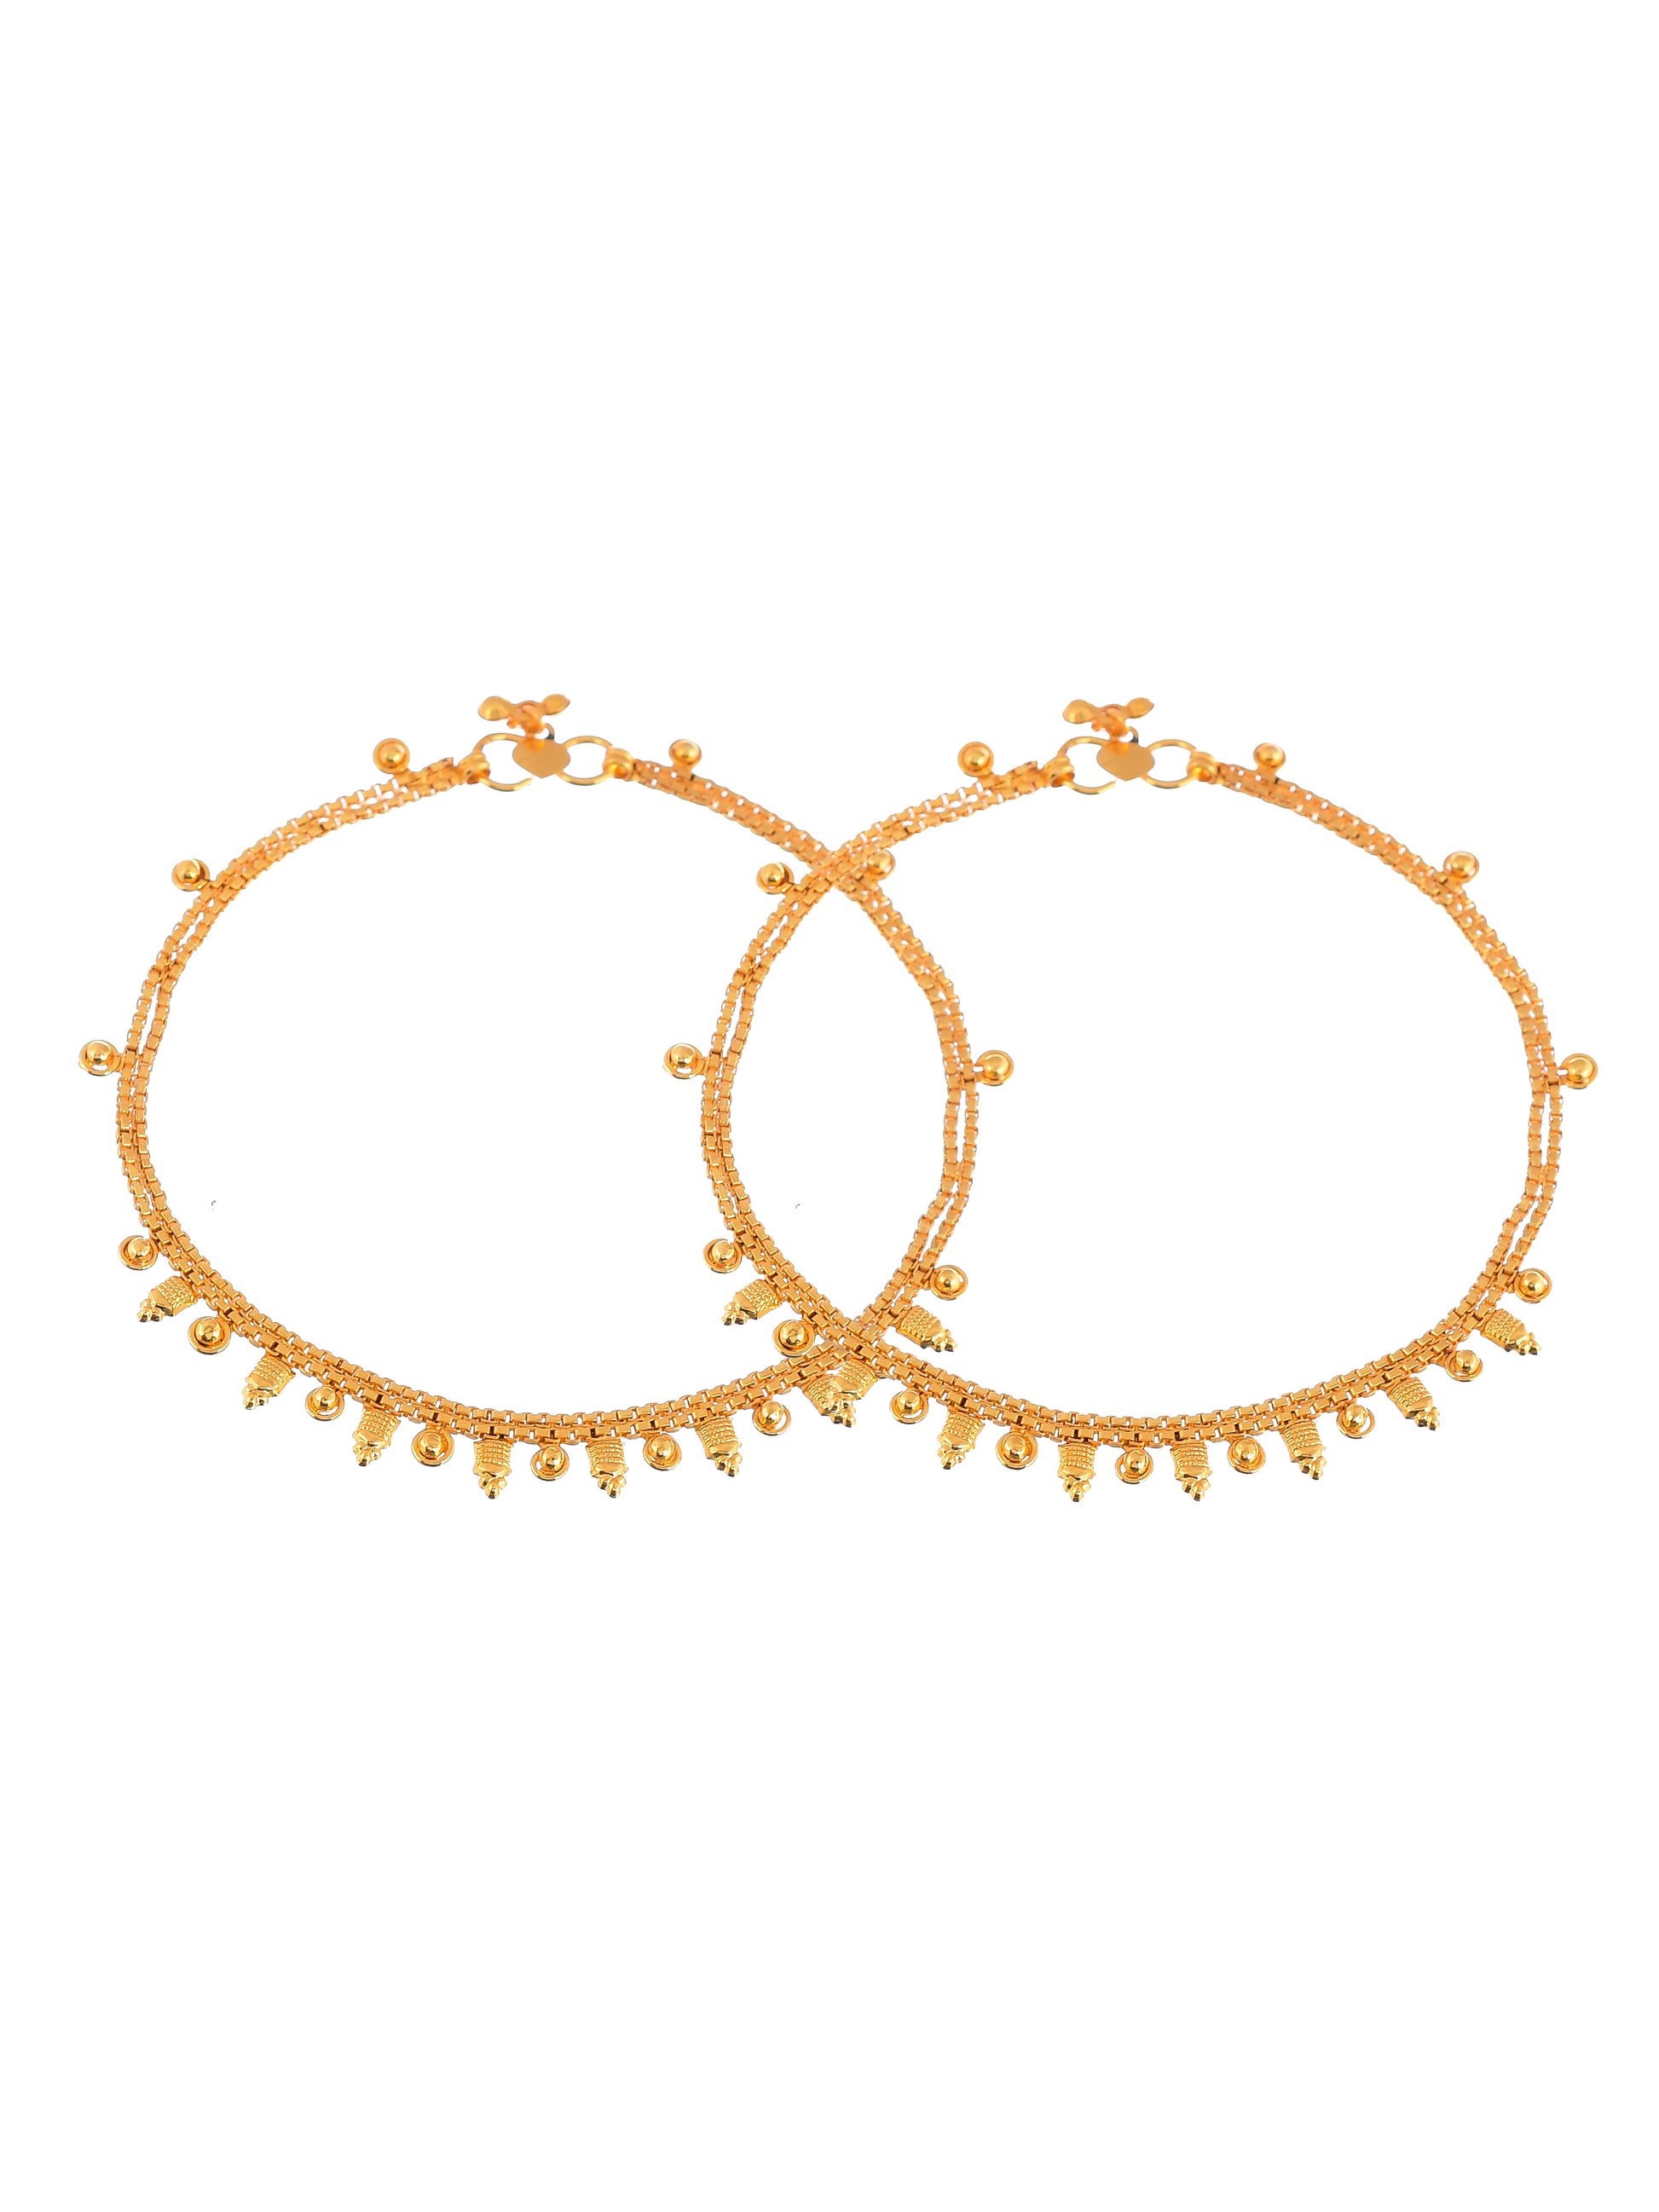 Unisex Golden Delicate Chain Payal Anklet